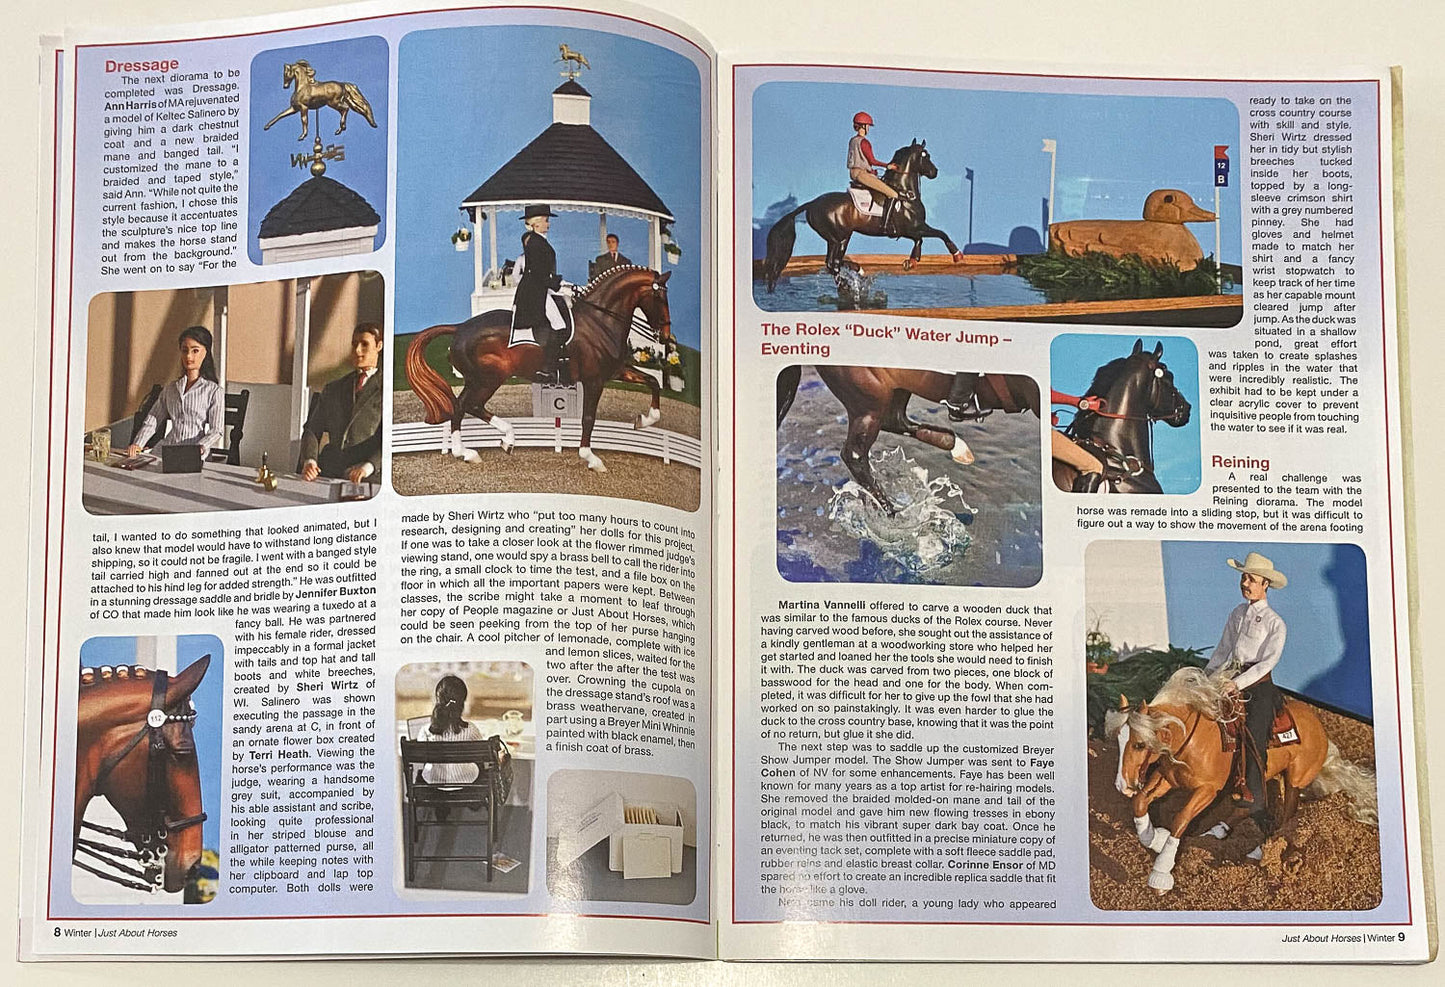 Just About Horses Magazine Vol. 38, No. 1, 2011 Winter